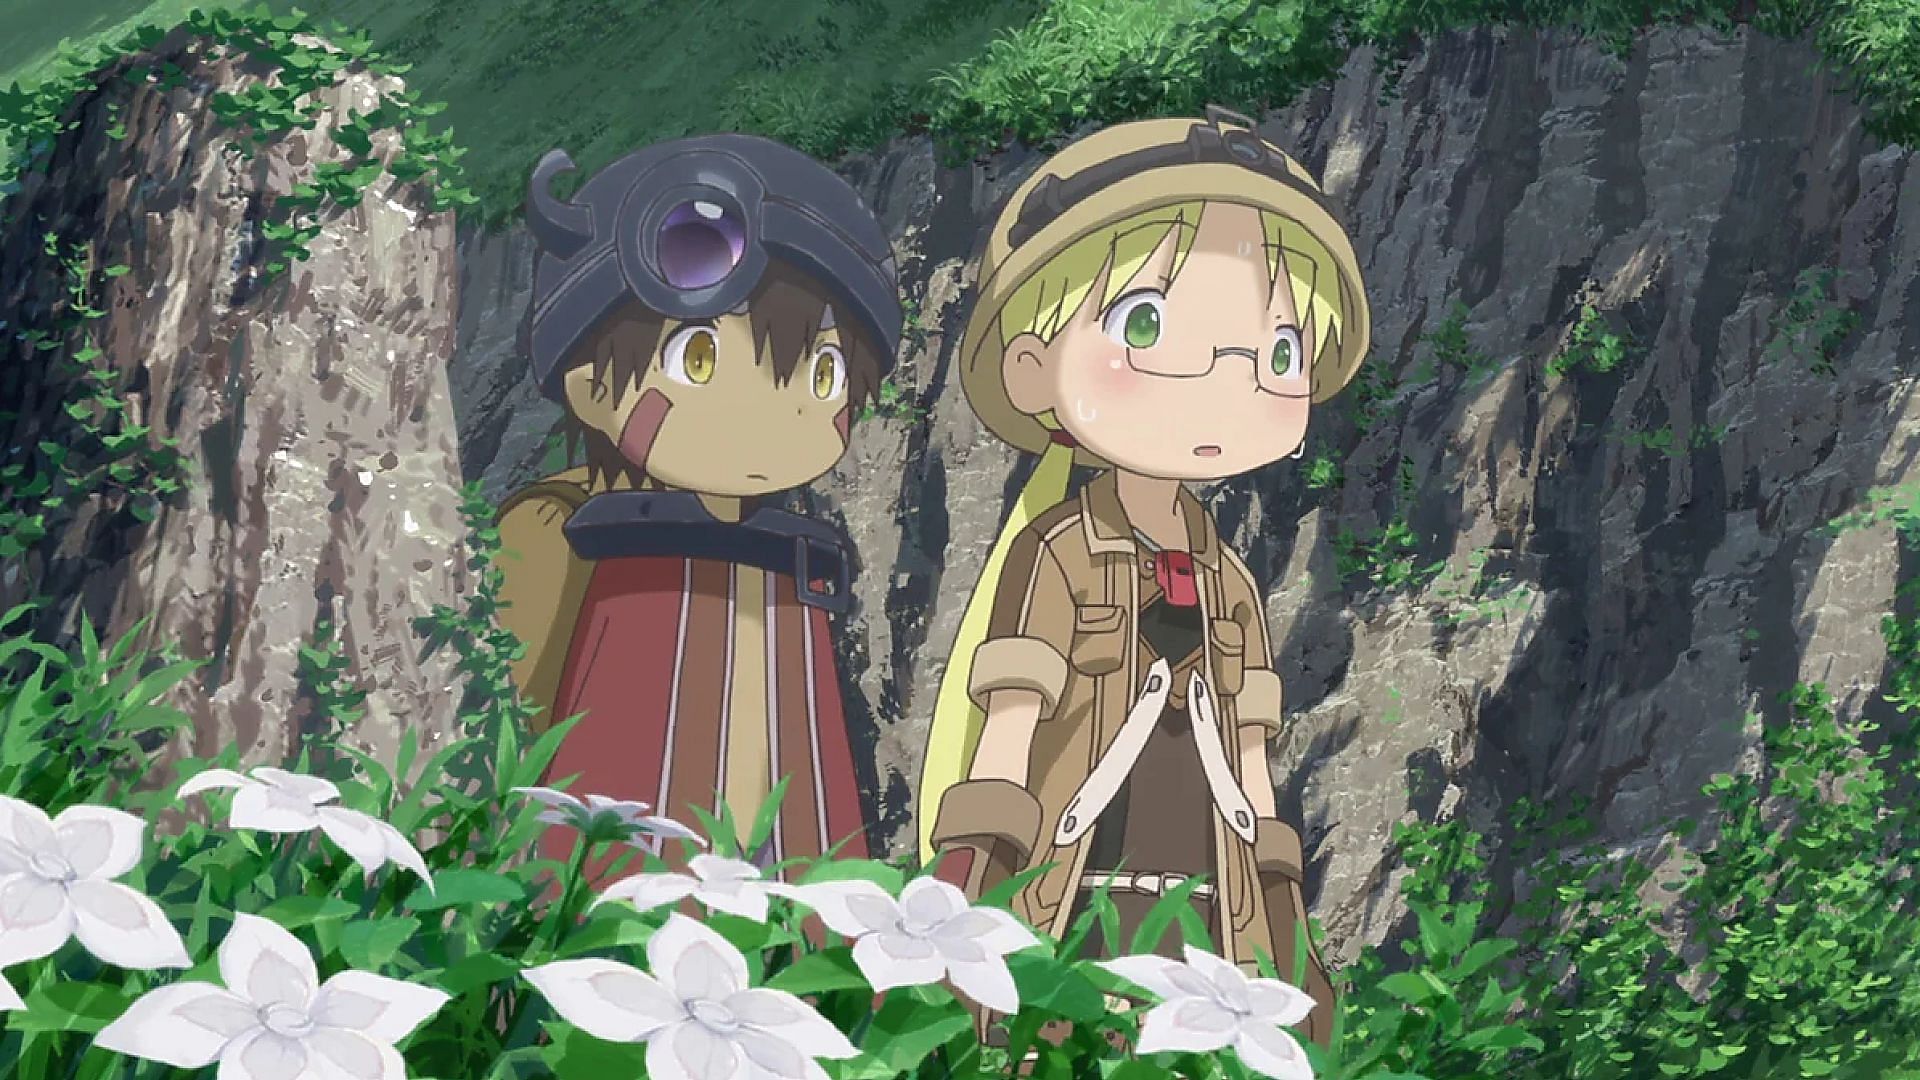 K-Pop stars face backlash for watching anime Made in Abyss. But why?